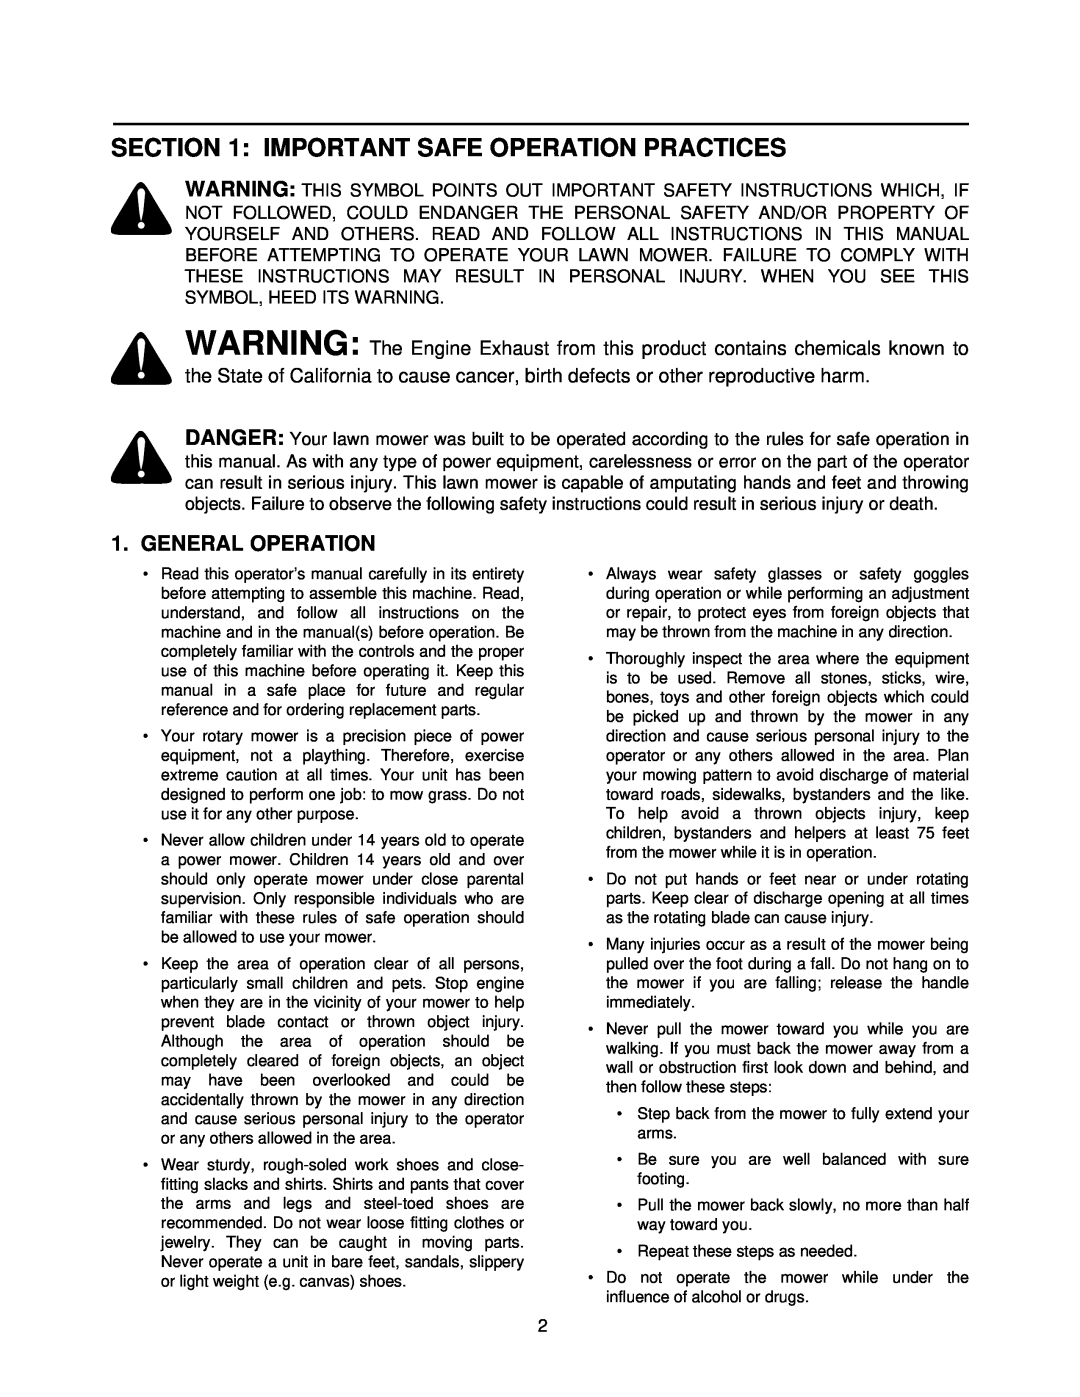 MTD 050 thru 062 manual Important Safe Operation Practices, General Operation 